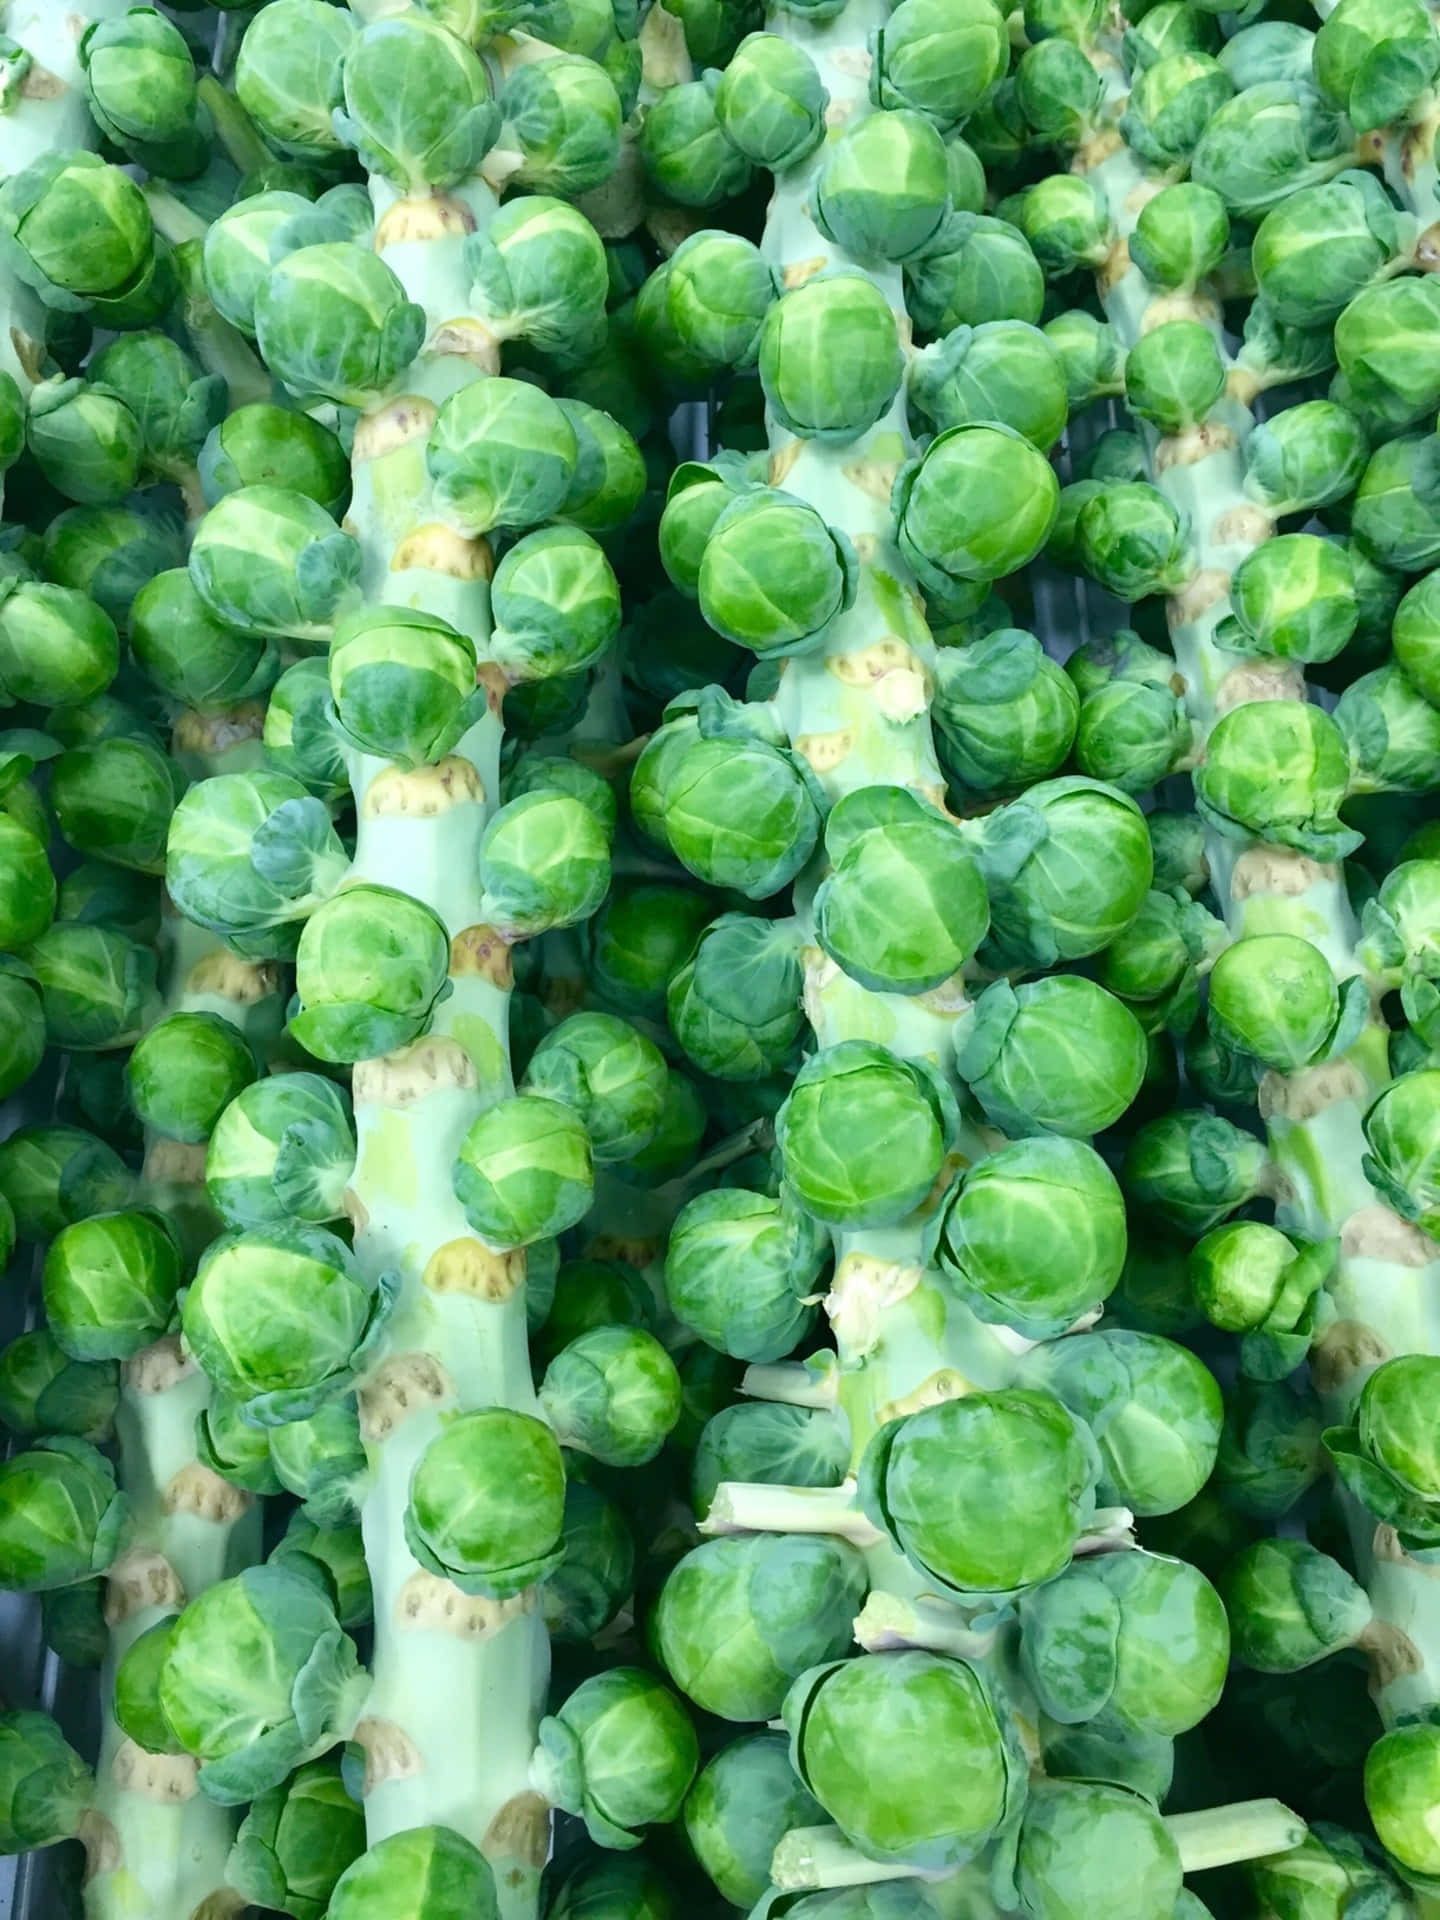 Brussel Sprouts In A Market